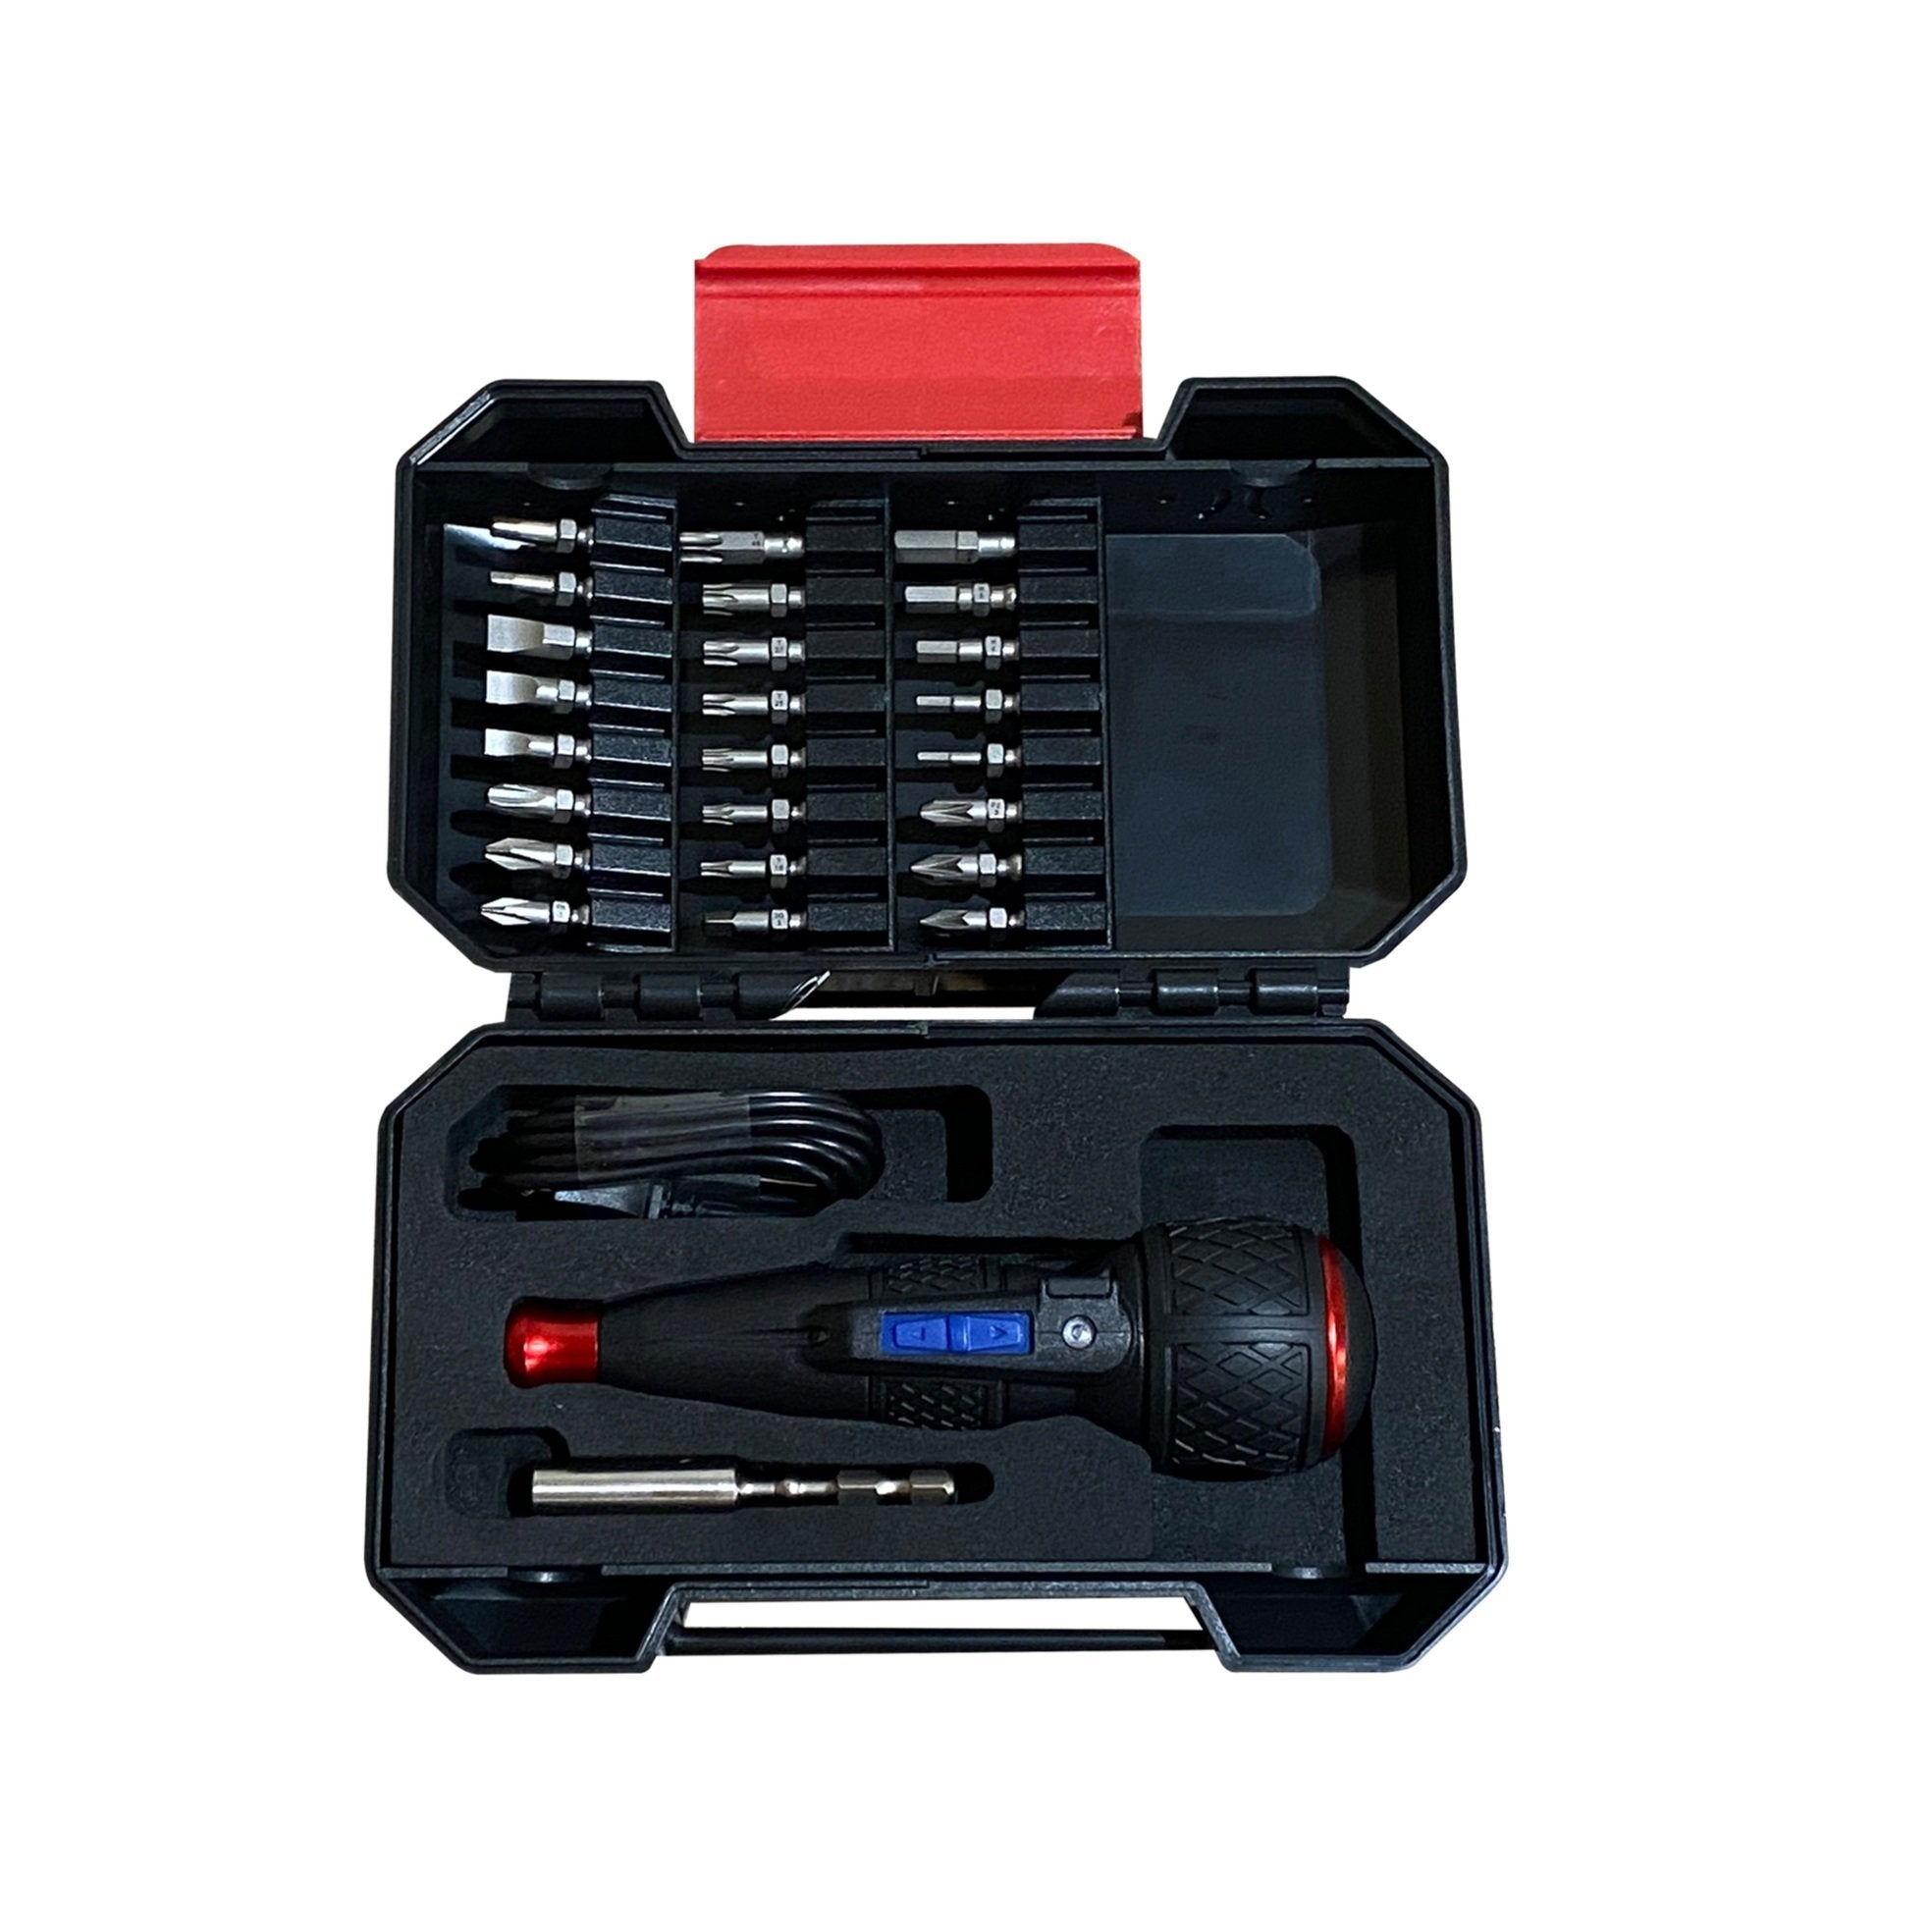 Battery Powered Screwdriver VESSEL Ball Grip 220USB Rechargeable with 25 PC. Bit Set